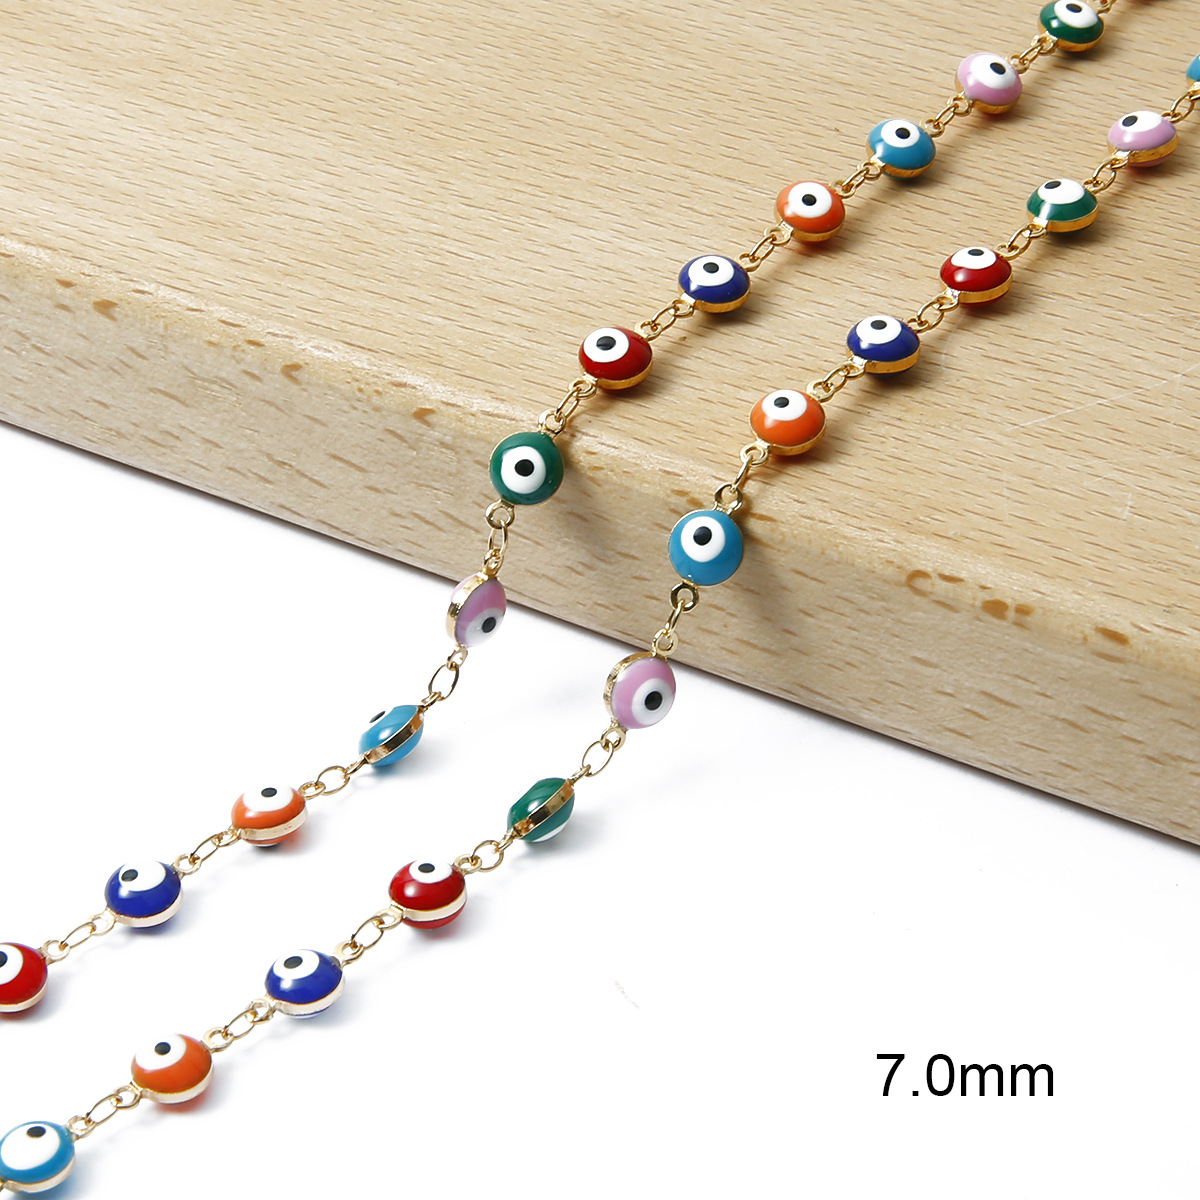 4:7mm oil drop chain/mixed color eyes /50cm/ strip